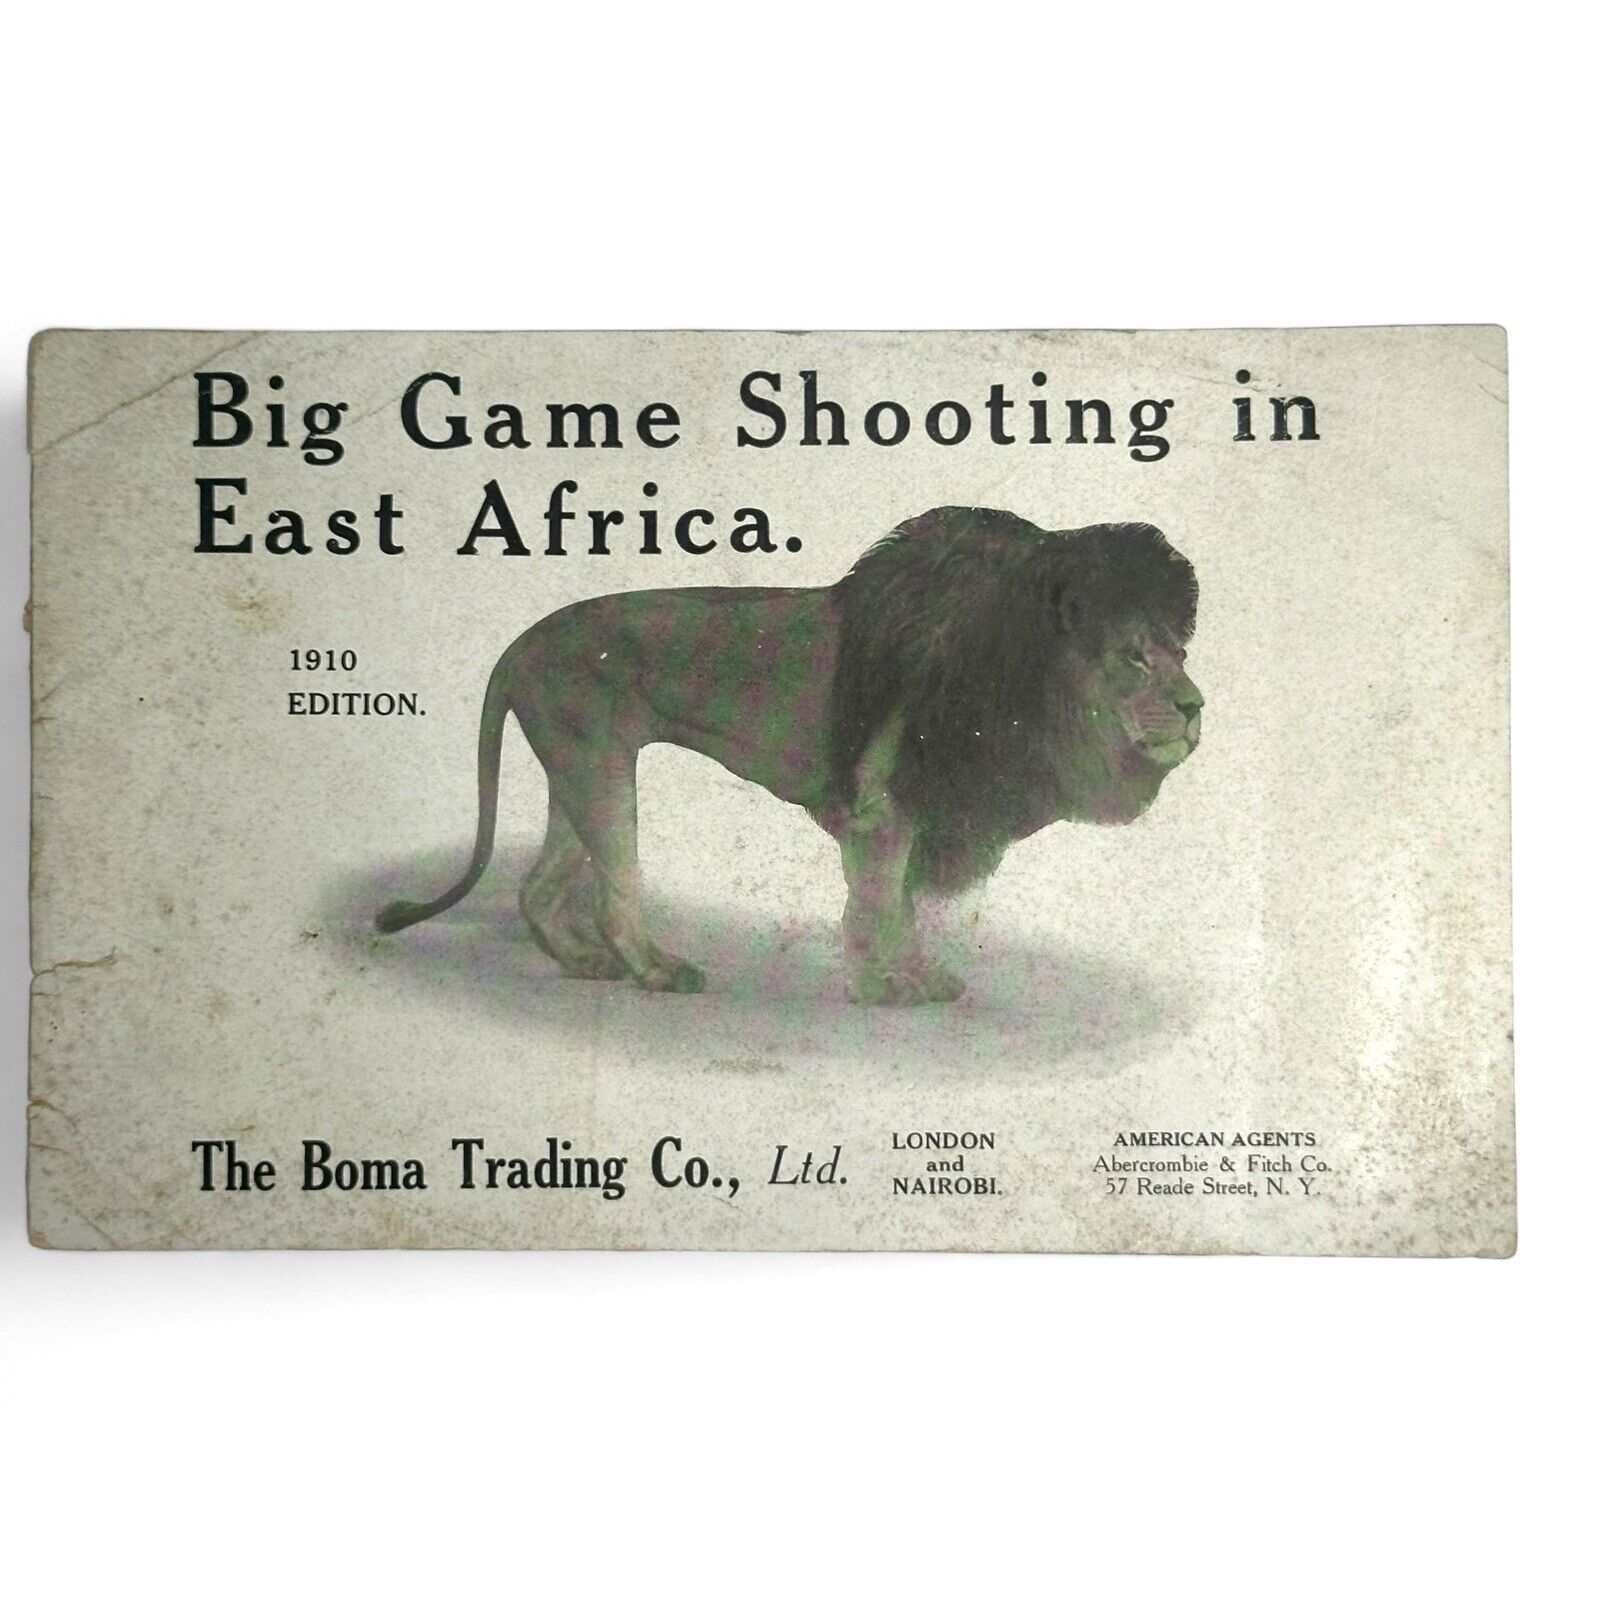 Antique 1910 ABERCROMBIE & FITCH & The Boma Trading Co Big Game Hunting Advert